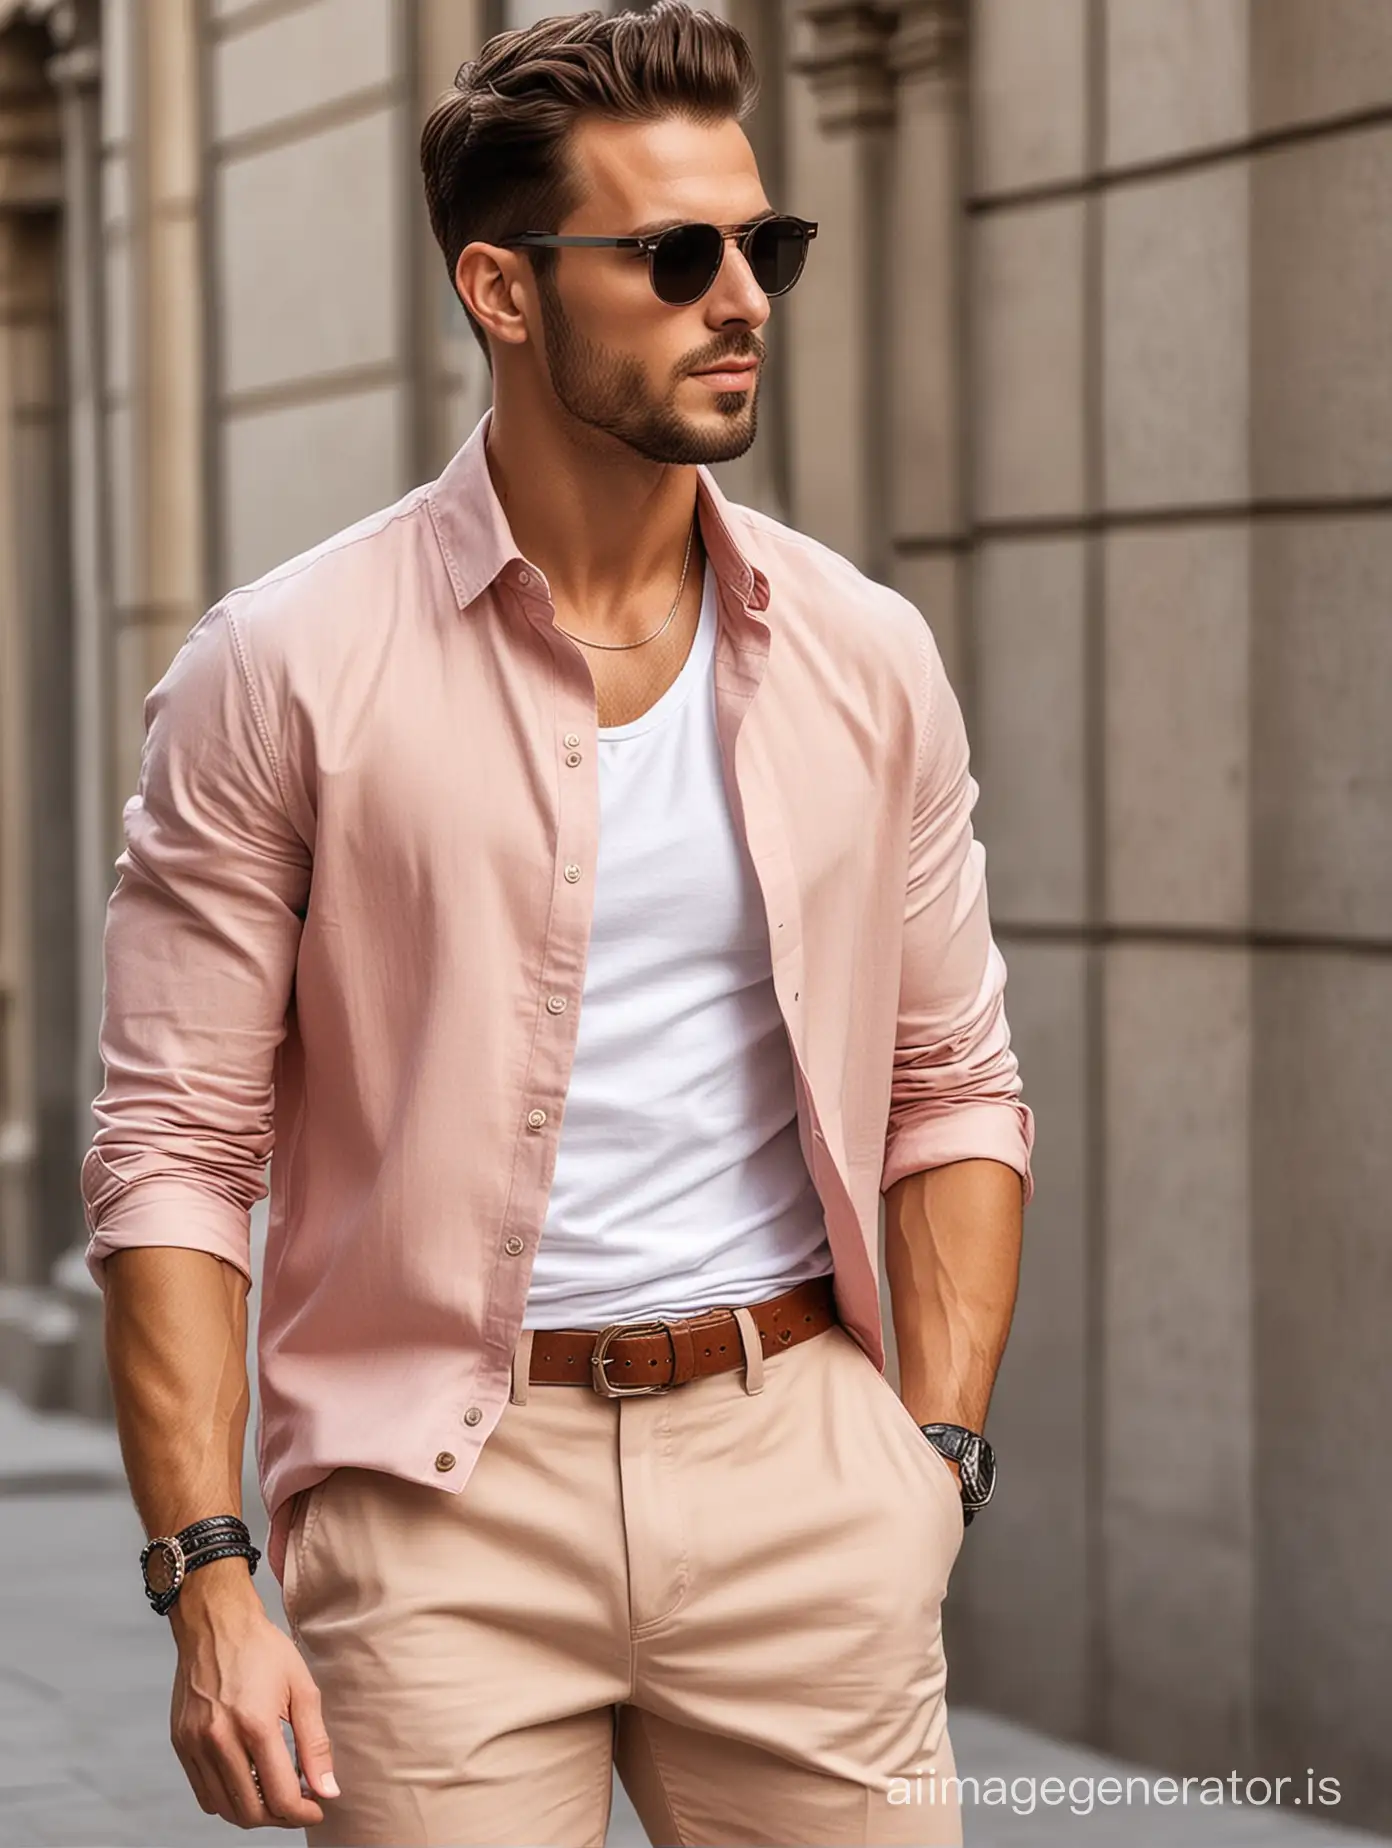 Mens-Stylish-Summer-Fashion-Outfit-Casual-Elegance-for-Warm-Weather